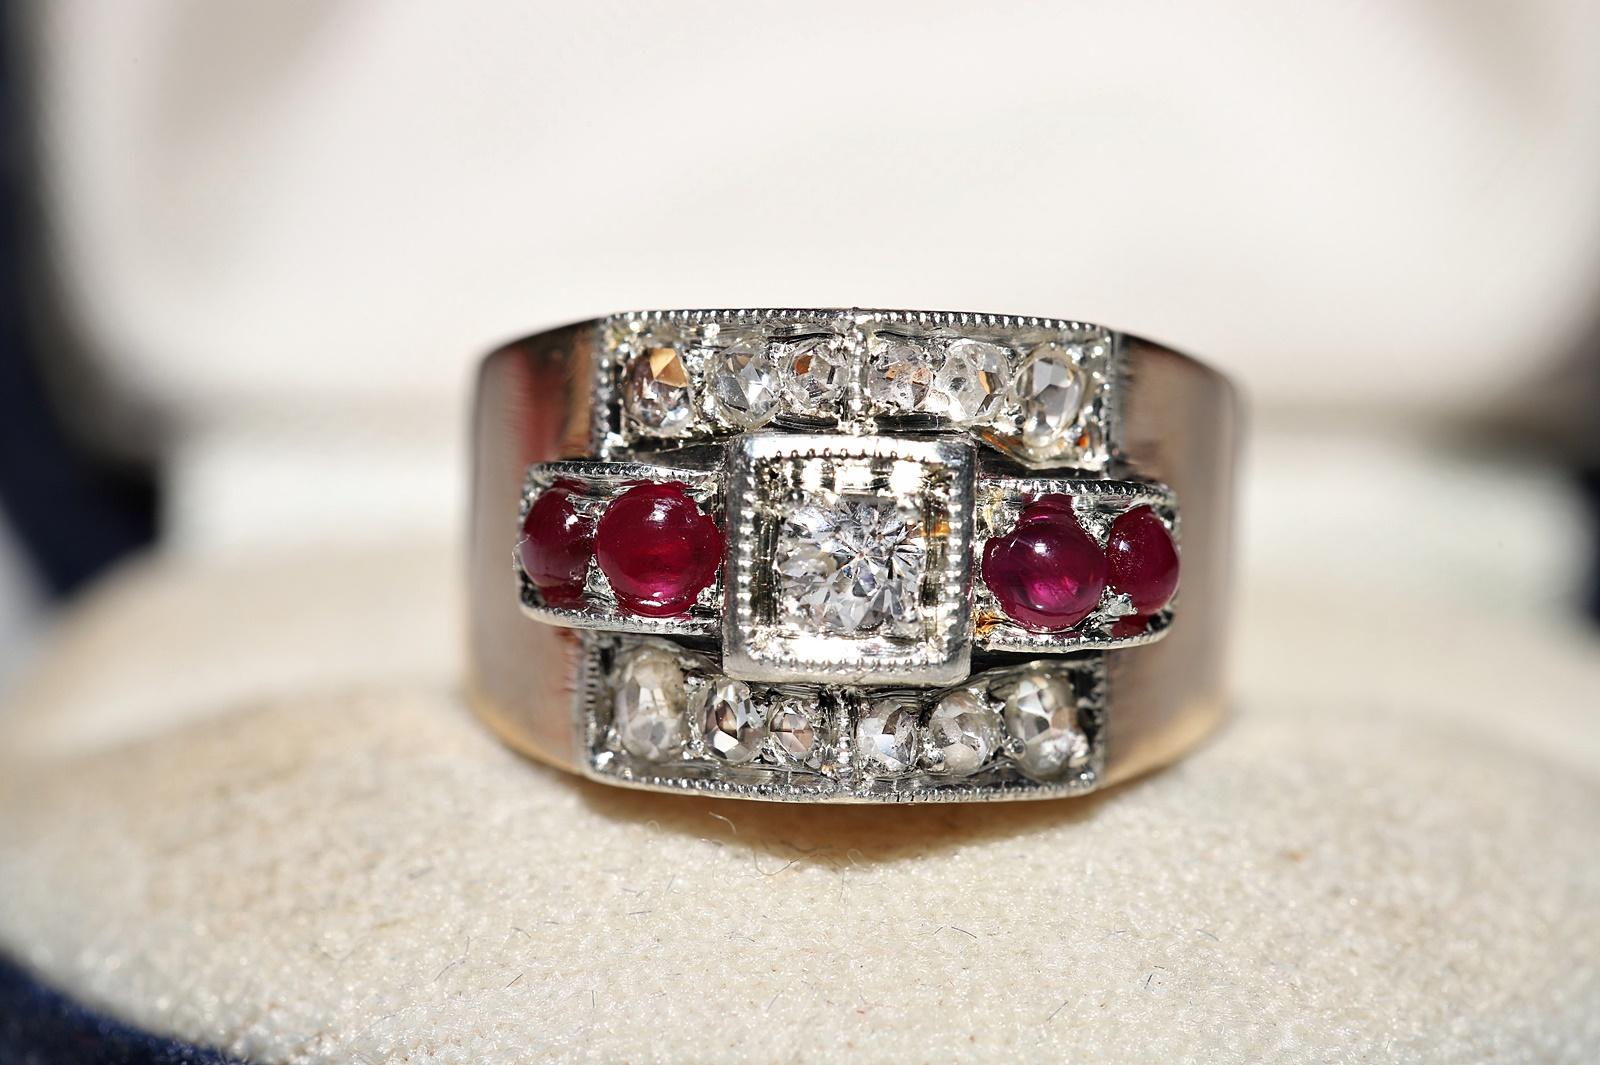 In very good condition.
Total weight is 5.4 grams.
Totally is brilliant cut diamond 0.16 ct.
Total weight is rose cut diamond 0.55 ct.
The diamond is has H color and vs-s1-s2 clarity.
Totally is ruby 0.44 ct.
Ring size is US 5.3 (We can make any